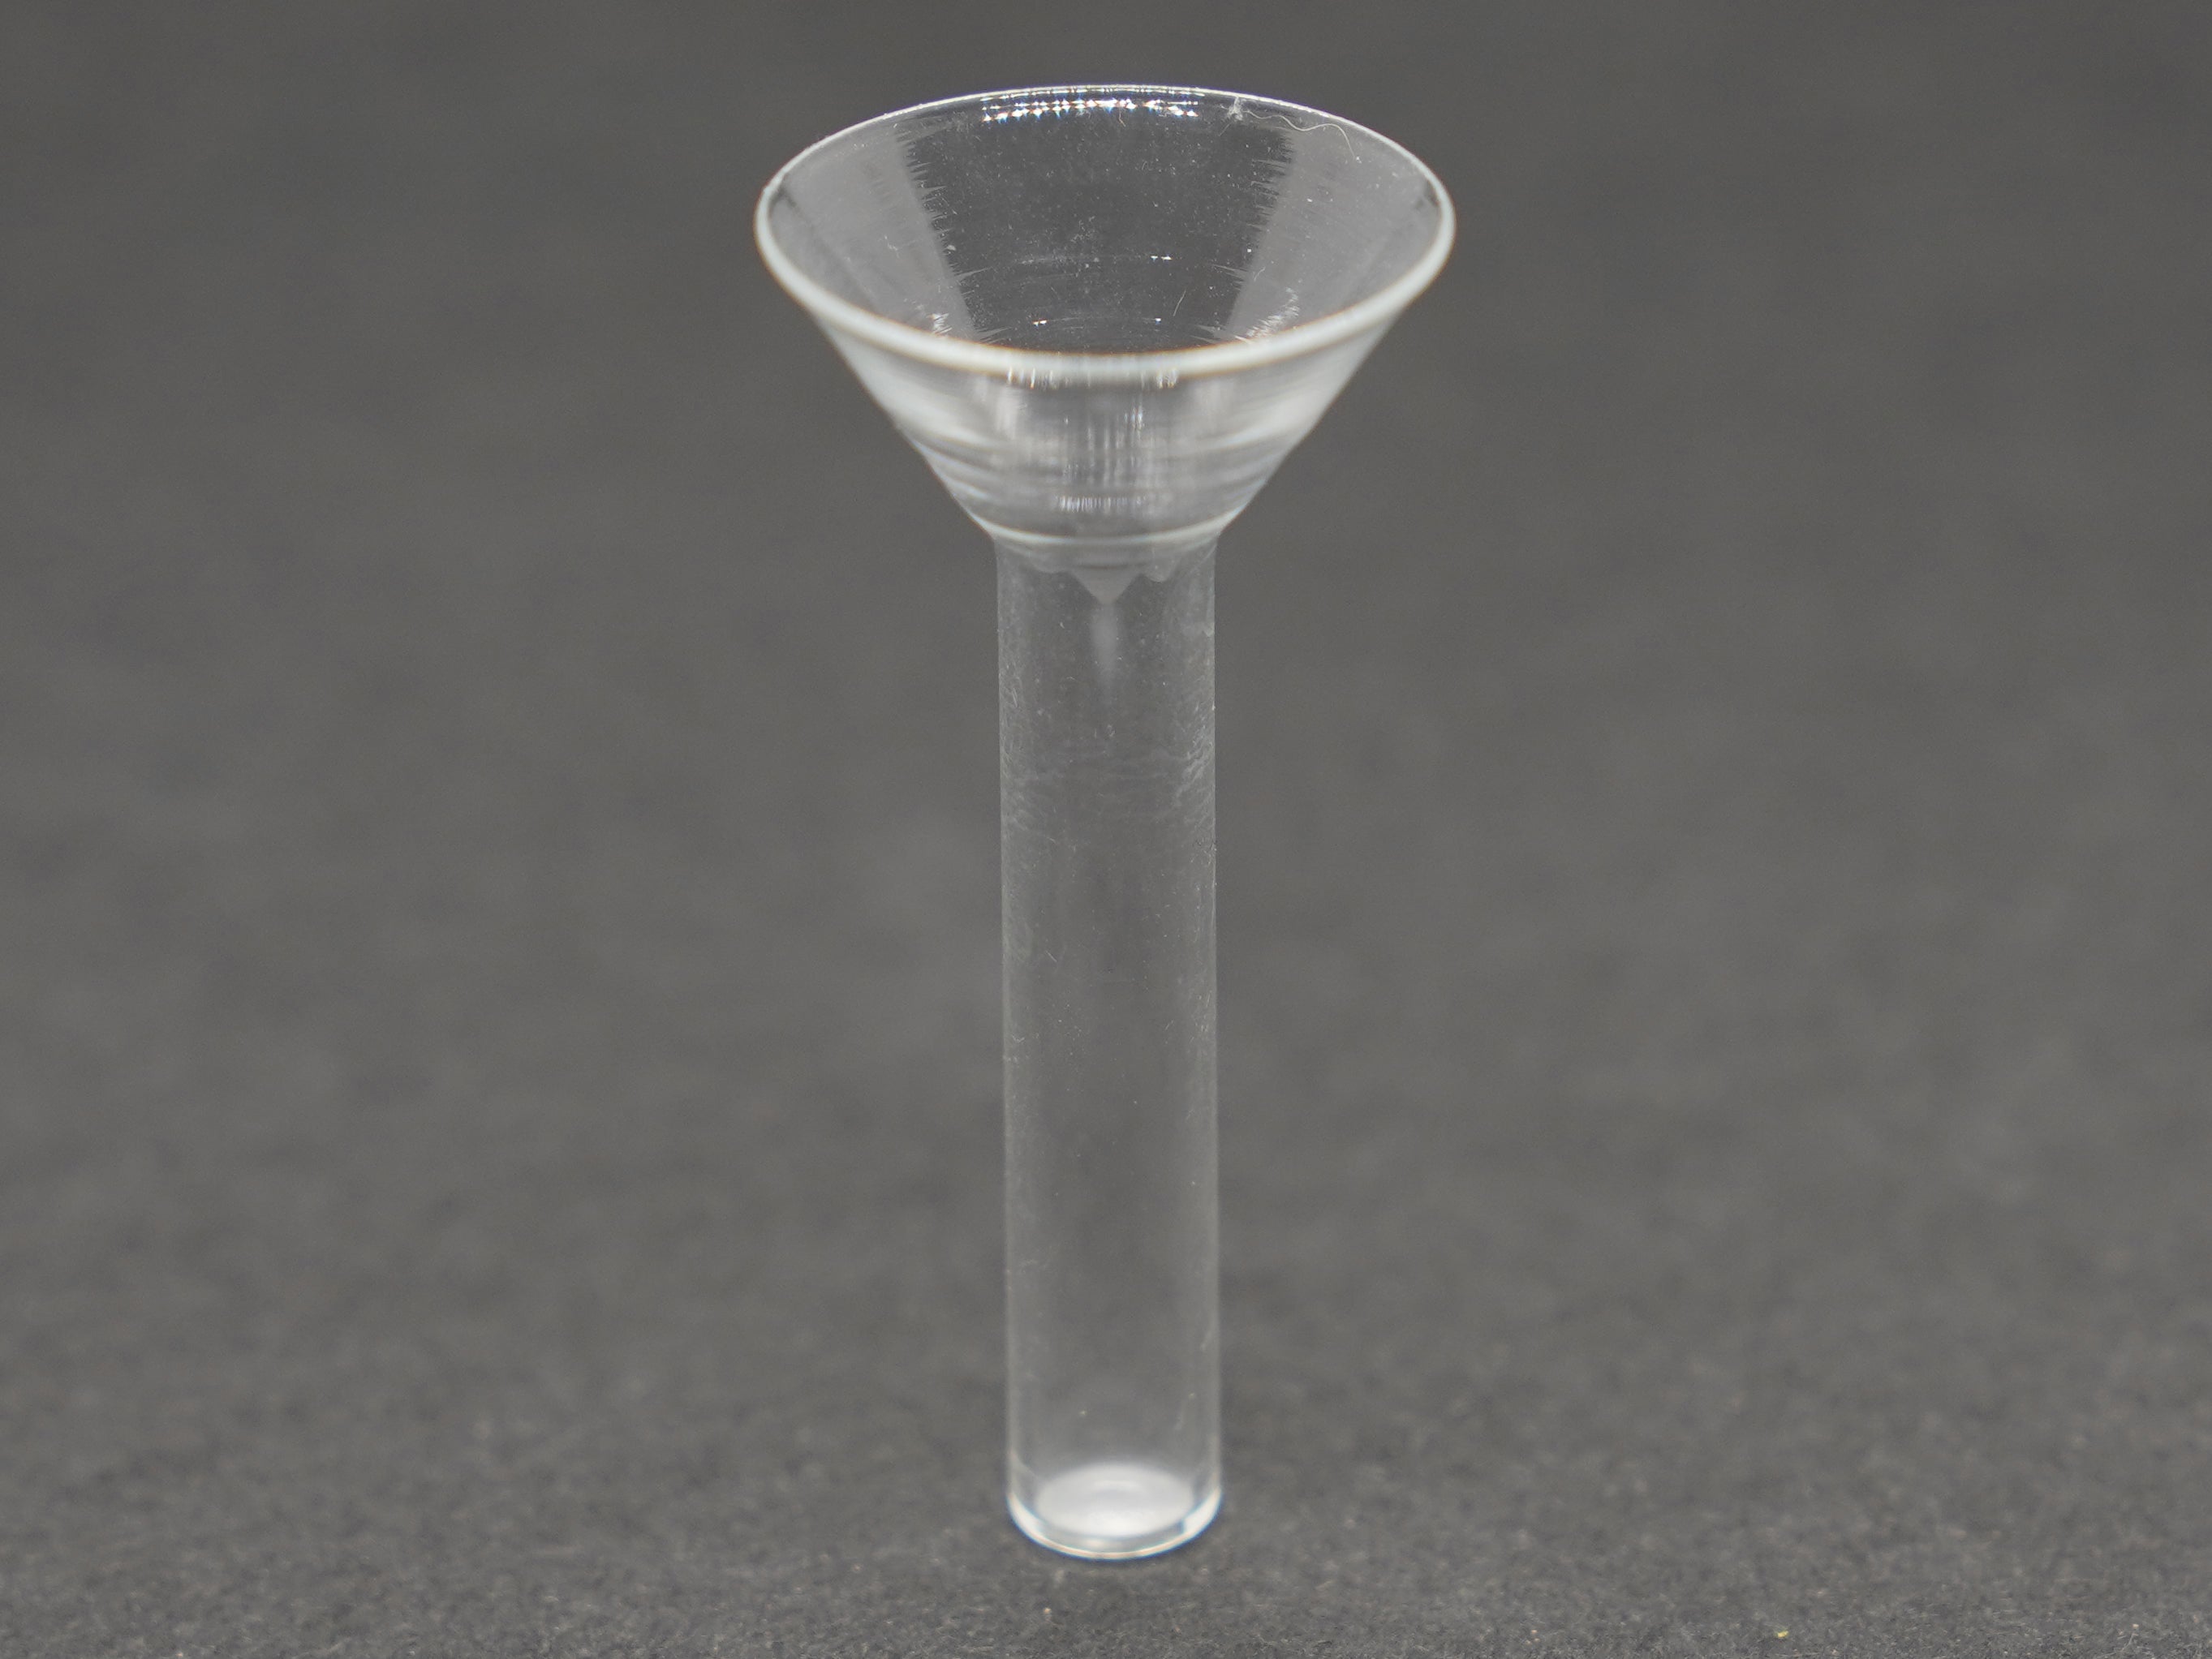 IN435-01: 8 mm glass vials w attached funnel, total height: 52mm, 100 pieces